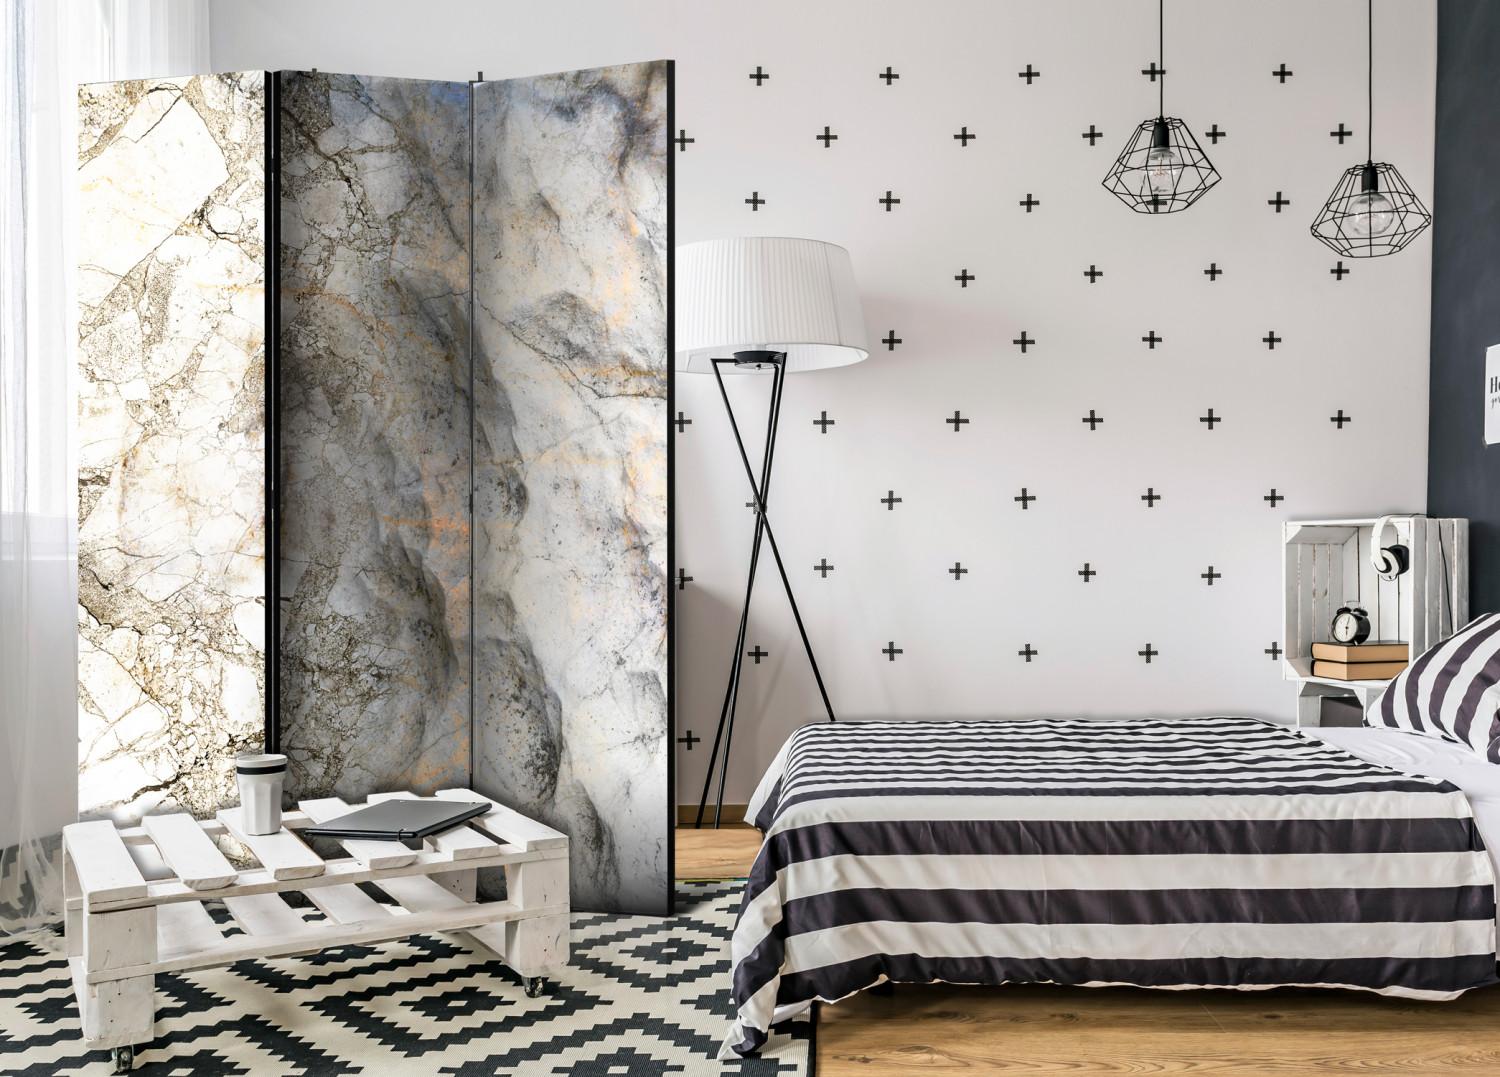 Room Divider Marble Puzzle - luxurious marble texture with a beige accent